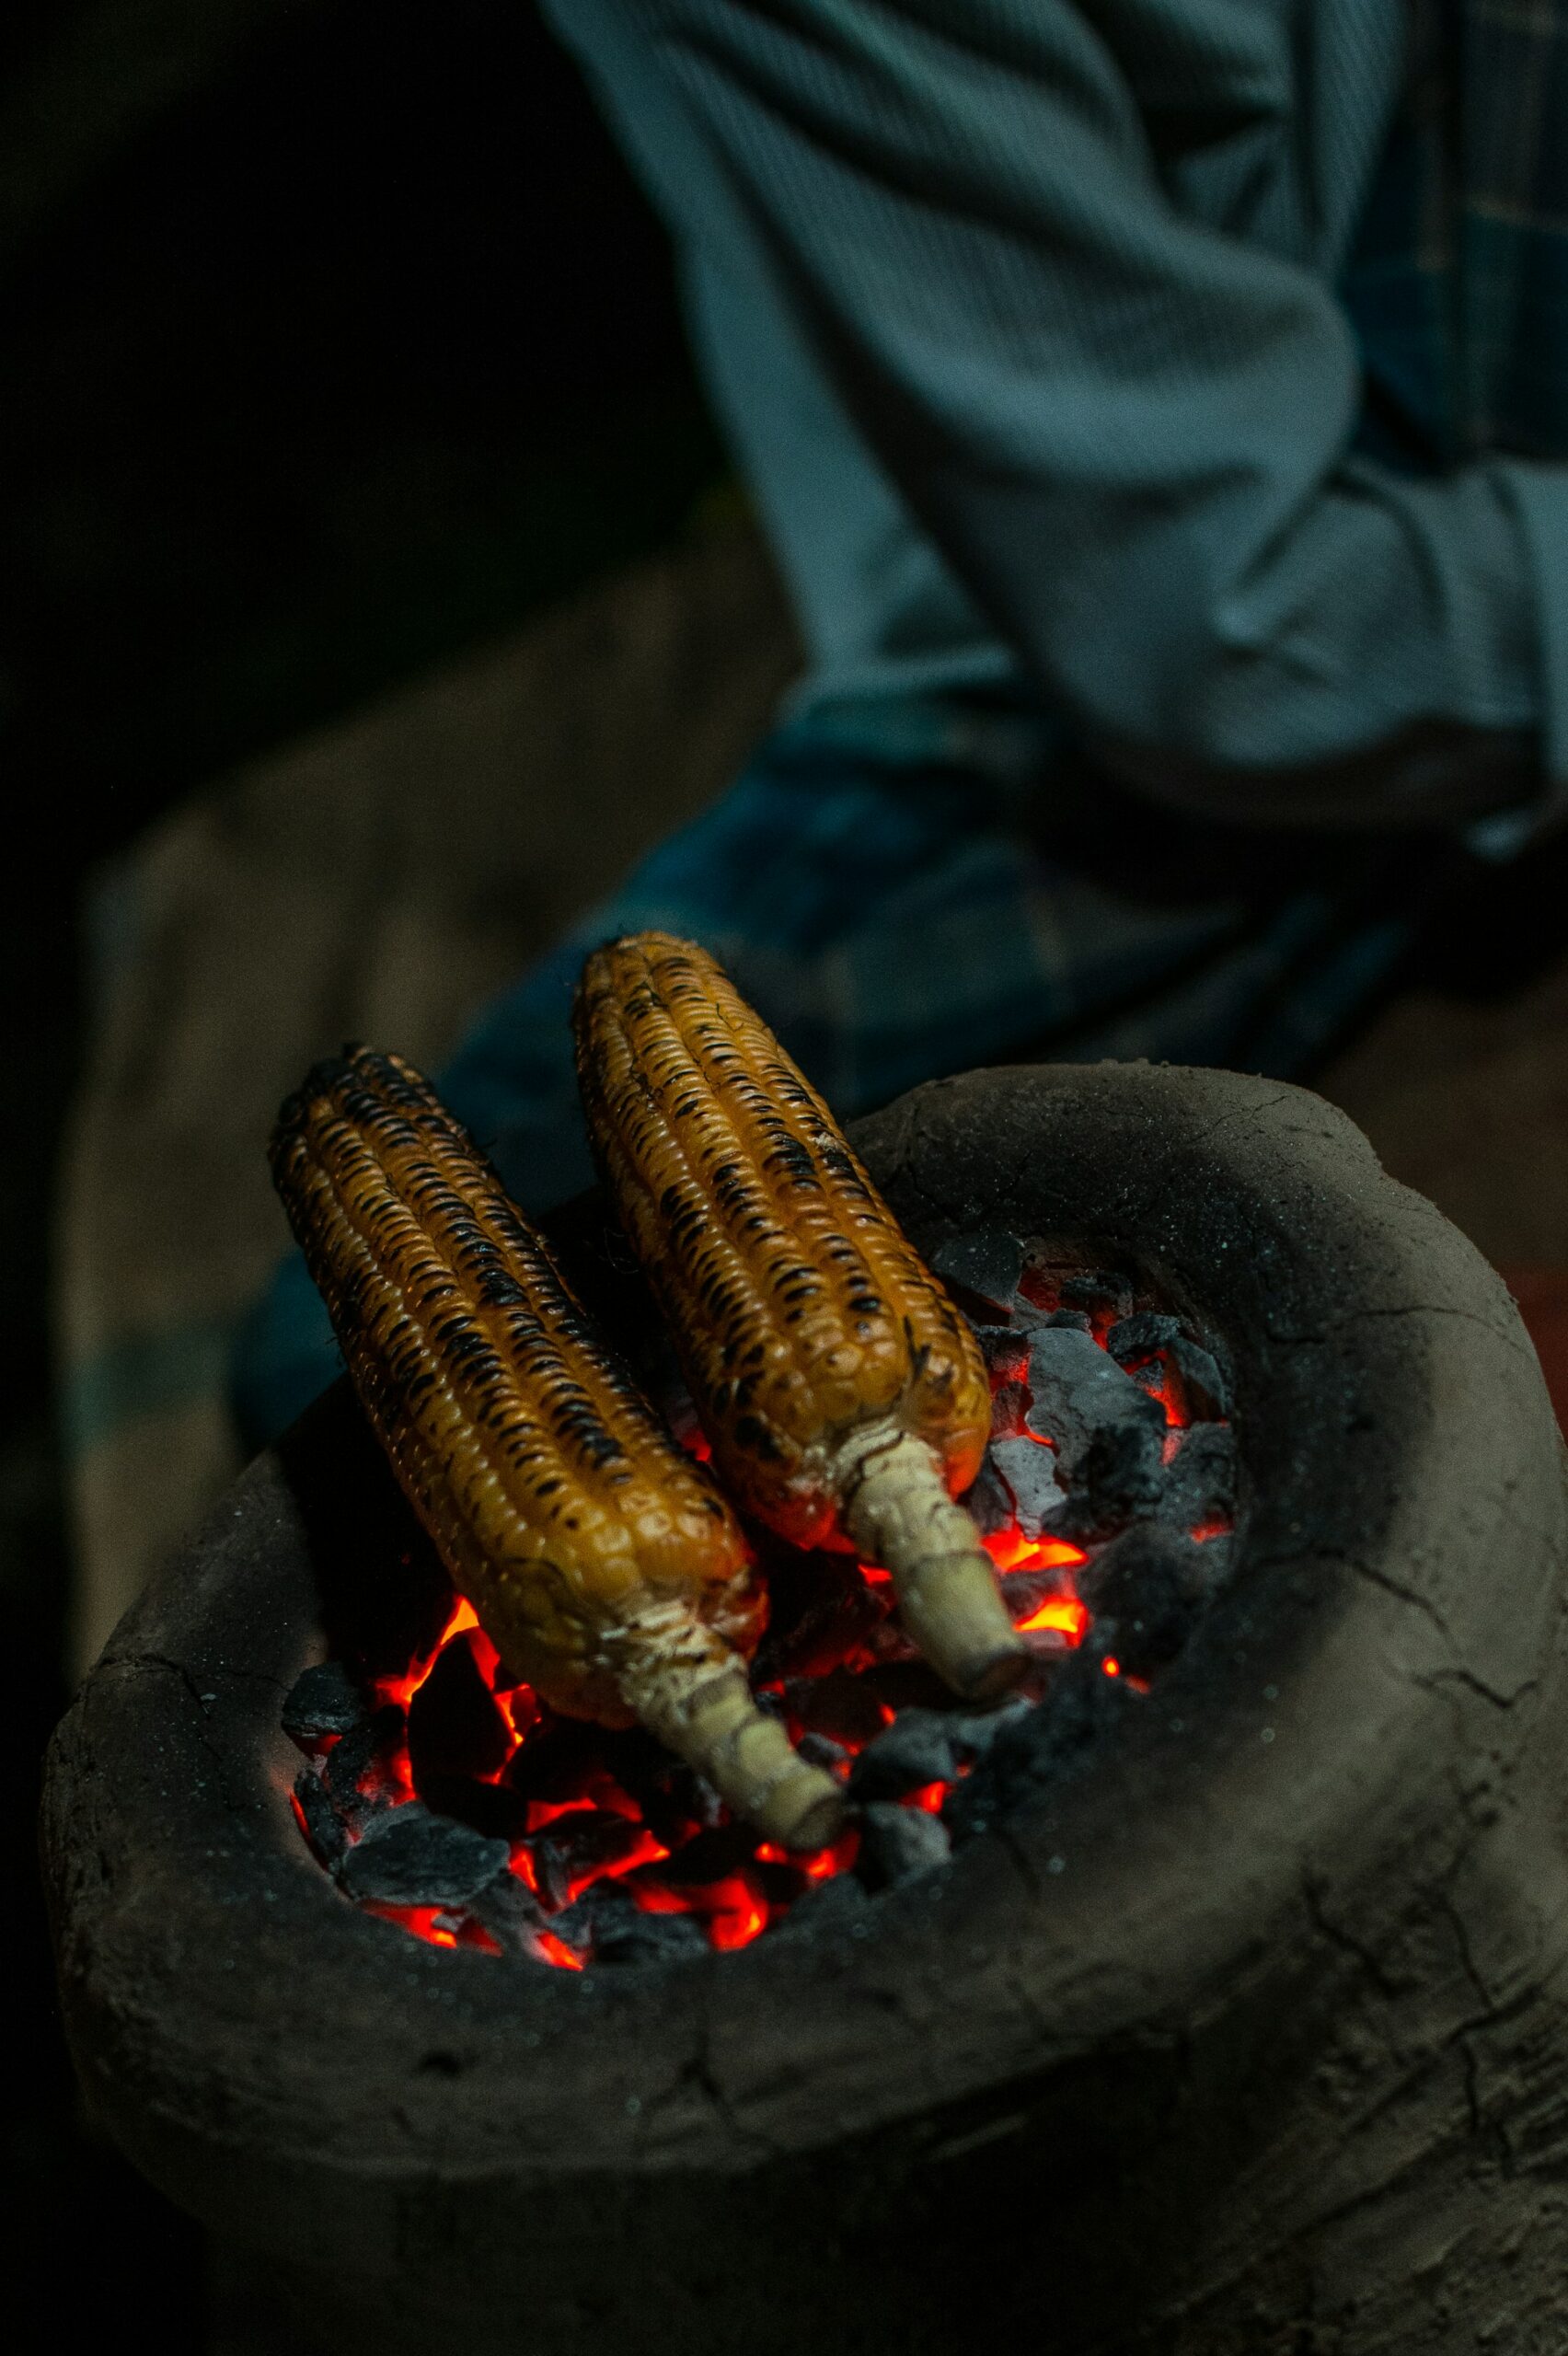 Simple yet so delicious, corn on the cob is the perfect side to any meal. Just grill it directly over the campfire and you're pretty much good to go! The corn is perfectly sweet on its own and grilling it just gives it that nice smokiness that takes it up a level.